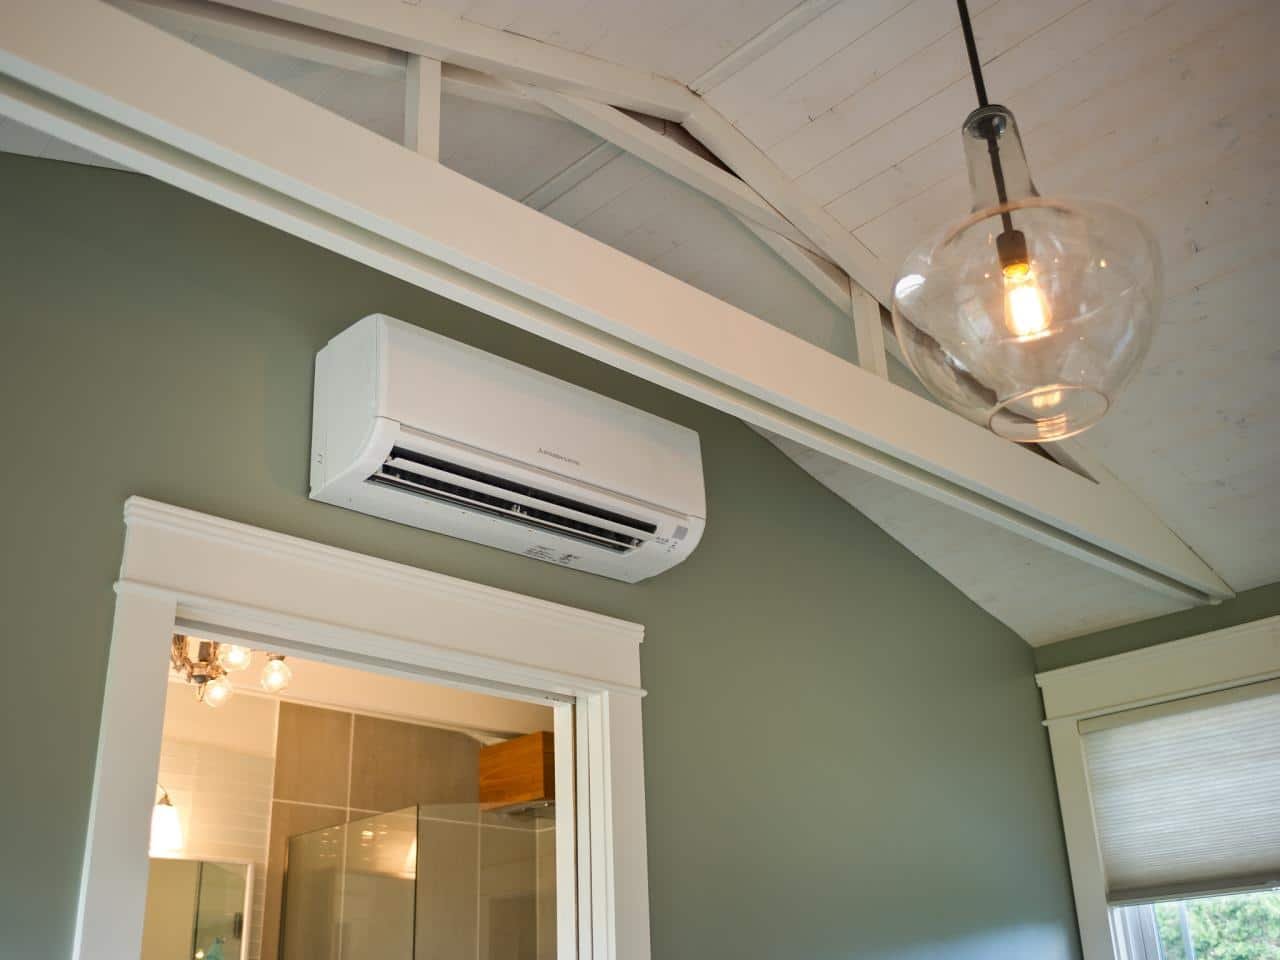 ductless-air-conditioner